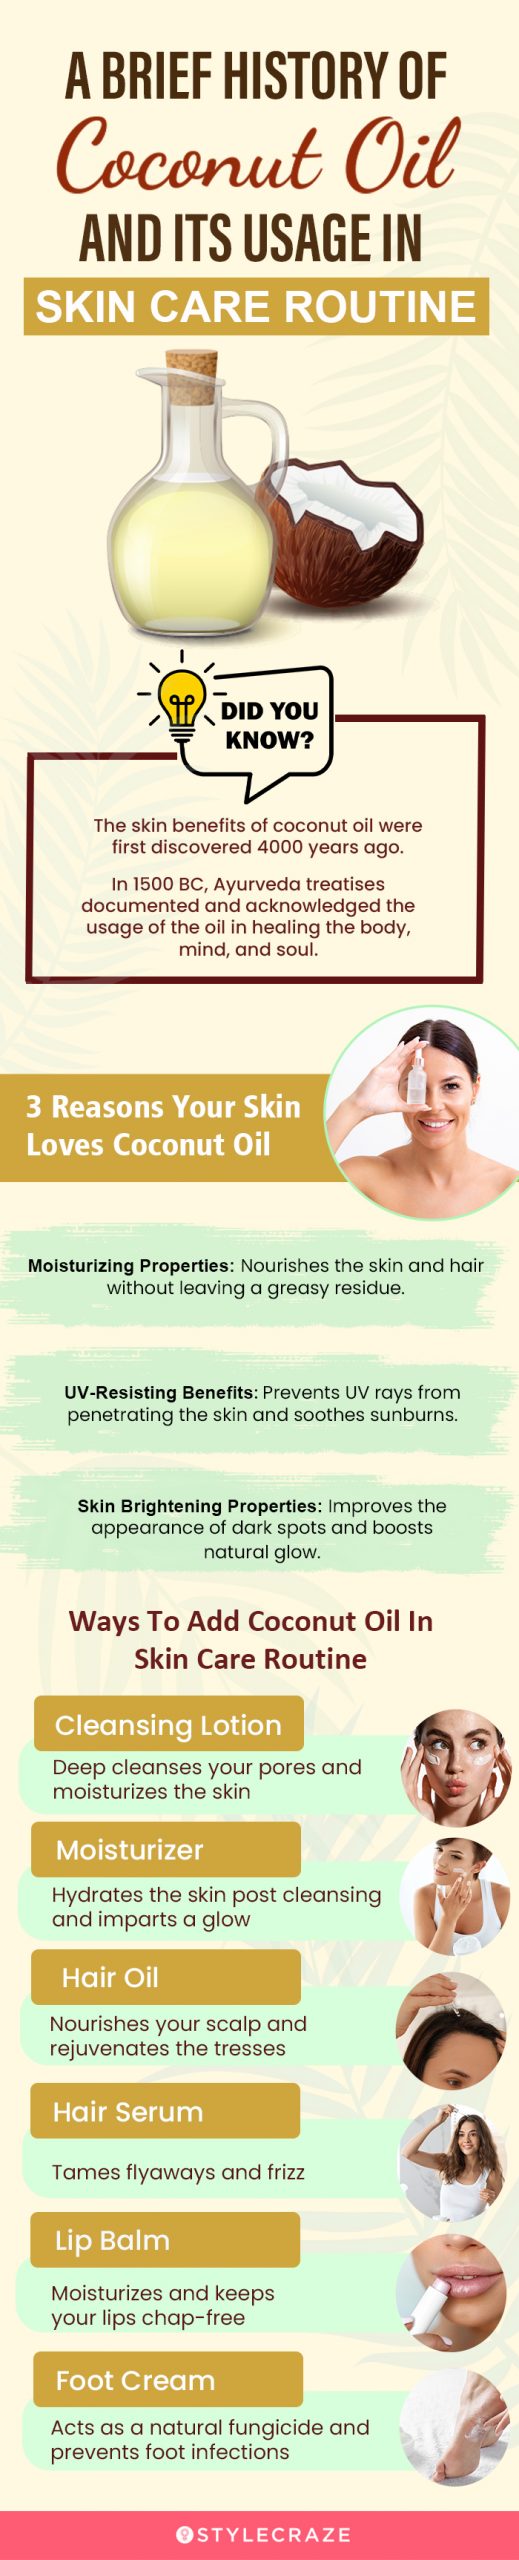 Reasons Your Skin Love Coconut Oil[infographic]